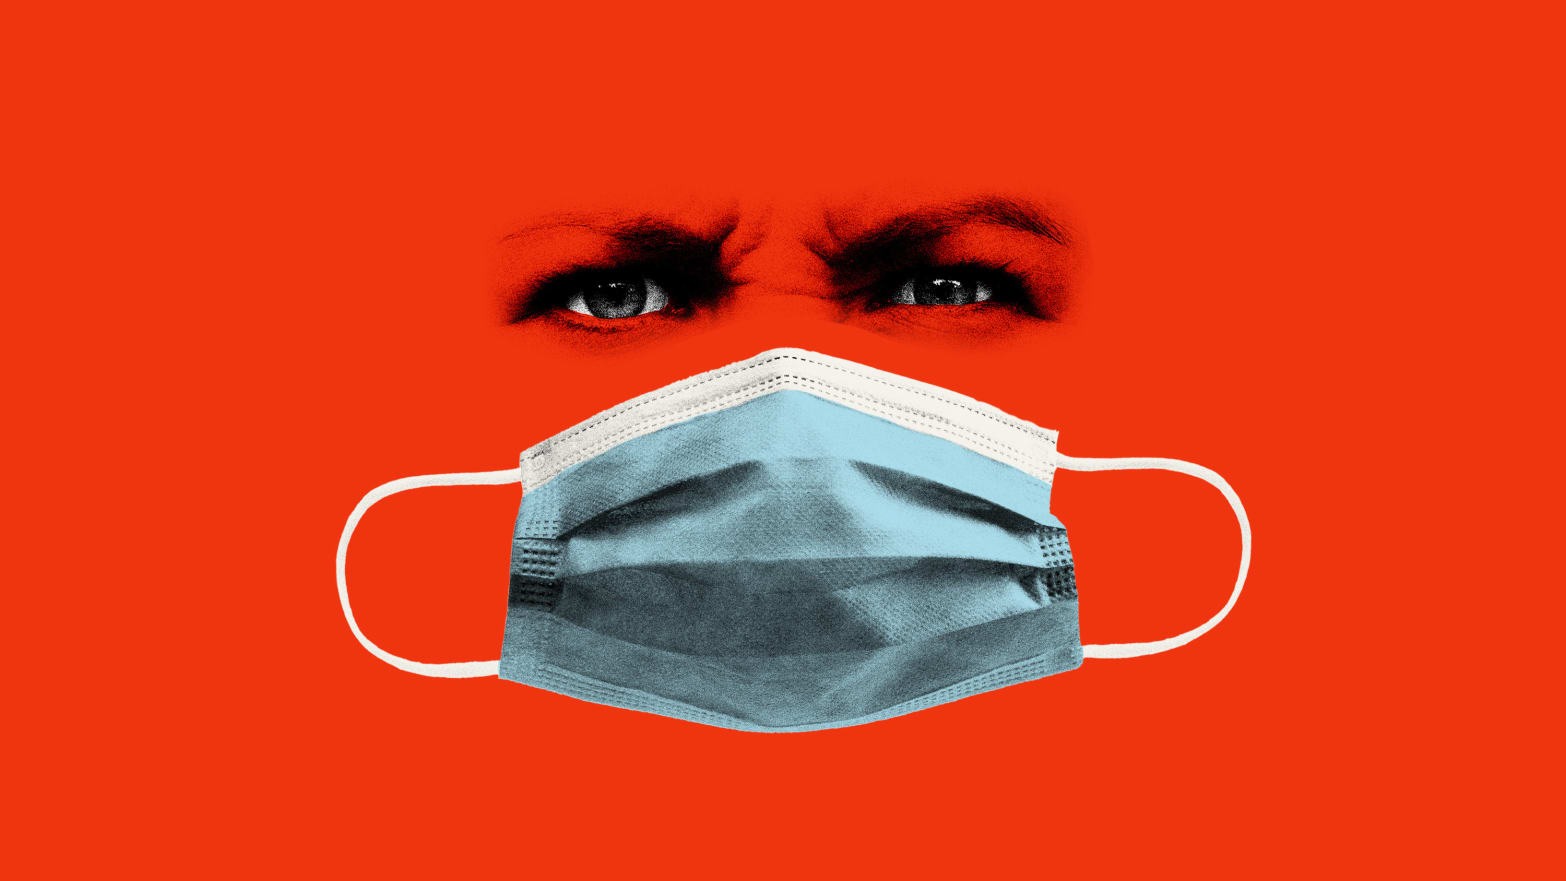 Why New CDC Mask Guidelines May Imperil Frontline Workers